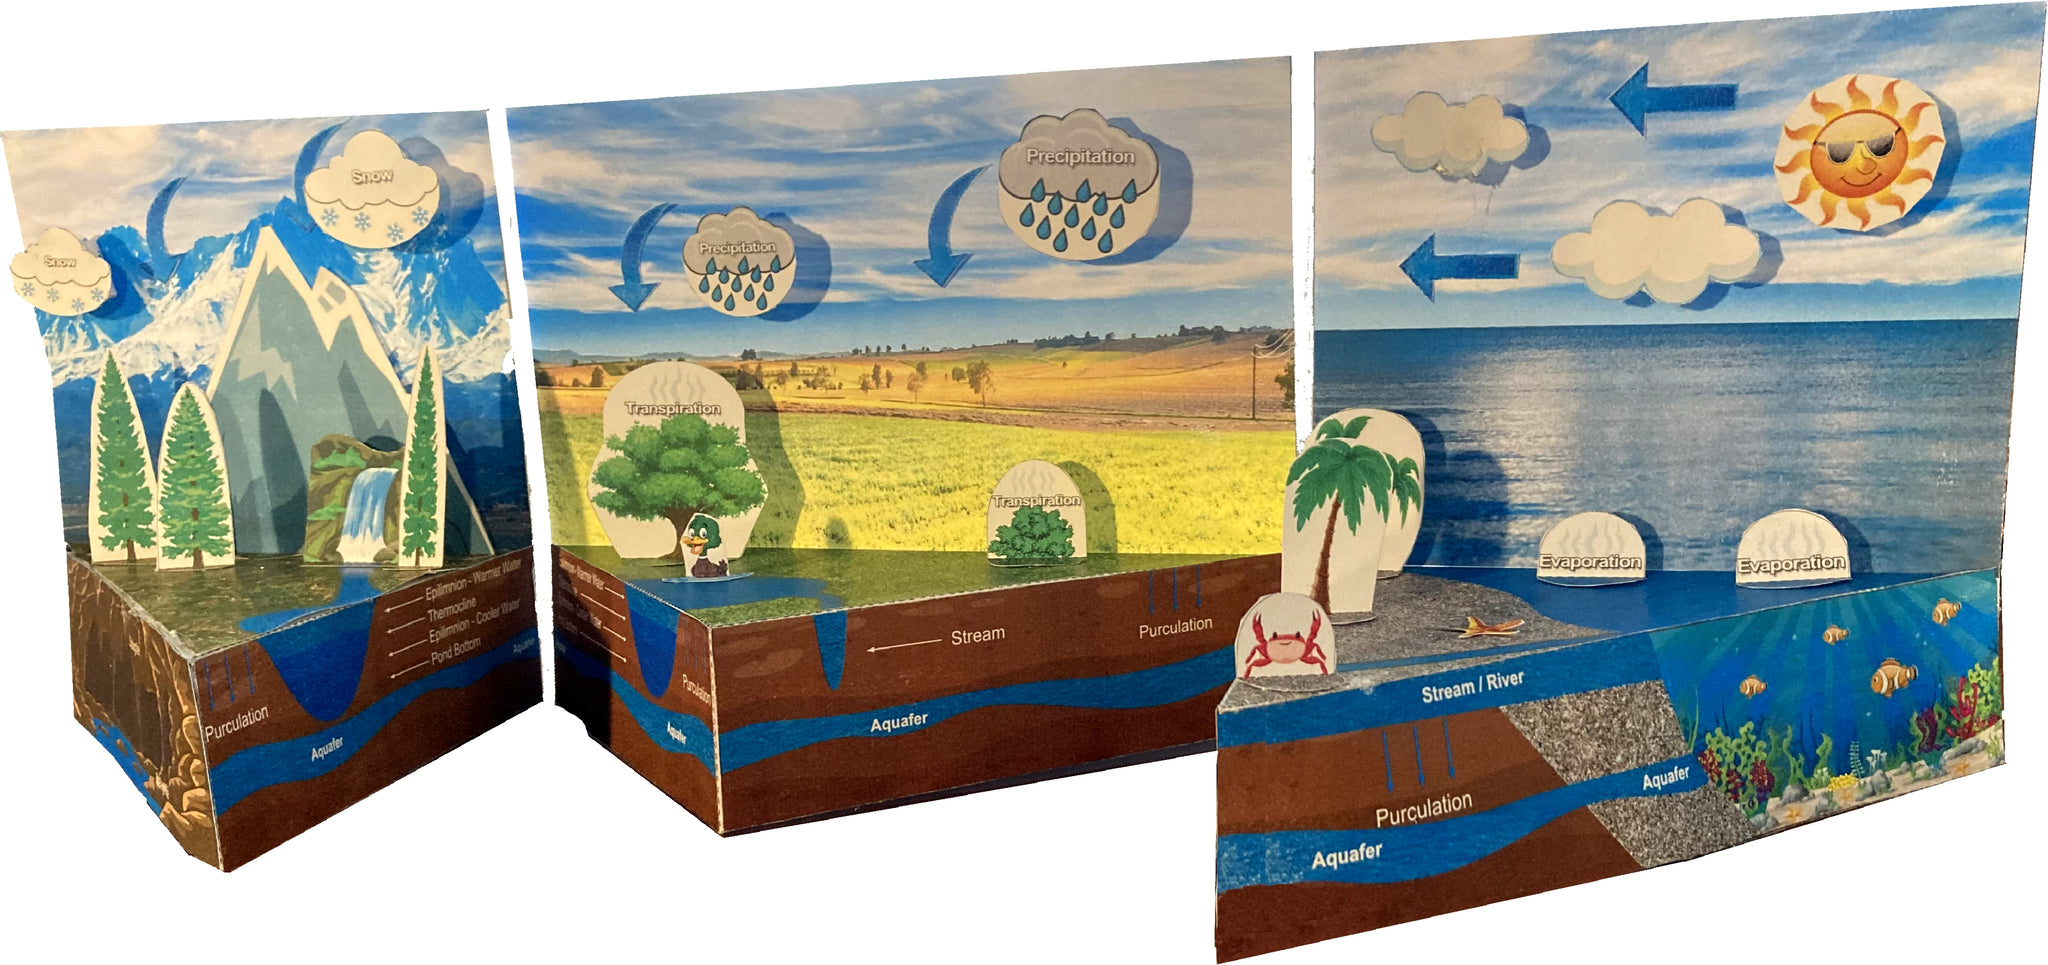 Paper Craft Animation of a Water Cycle - Make